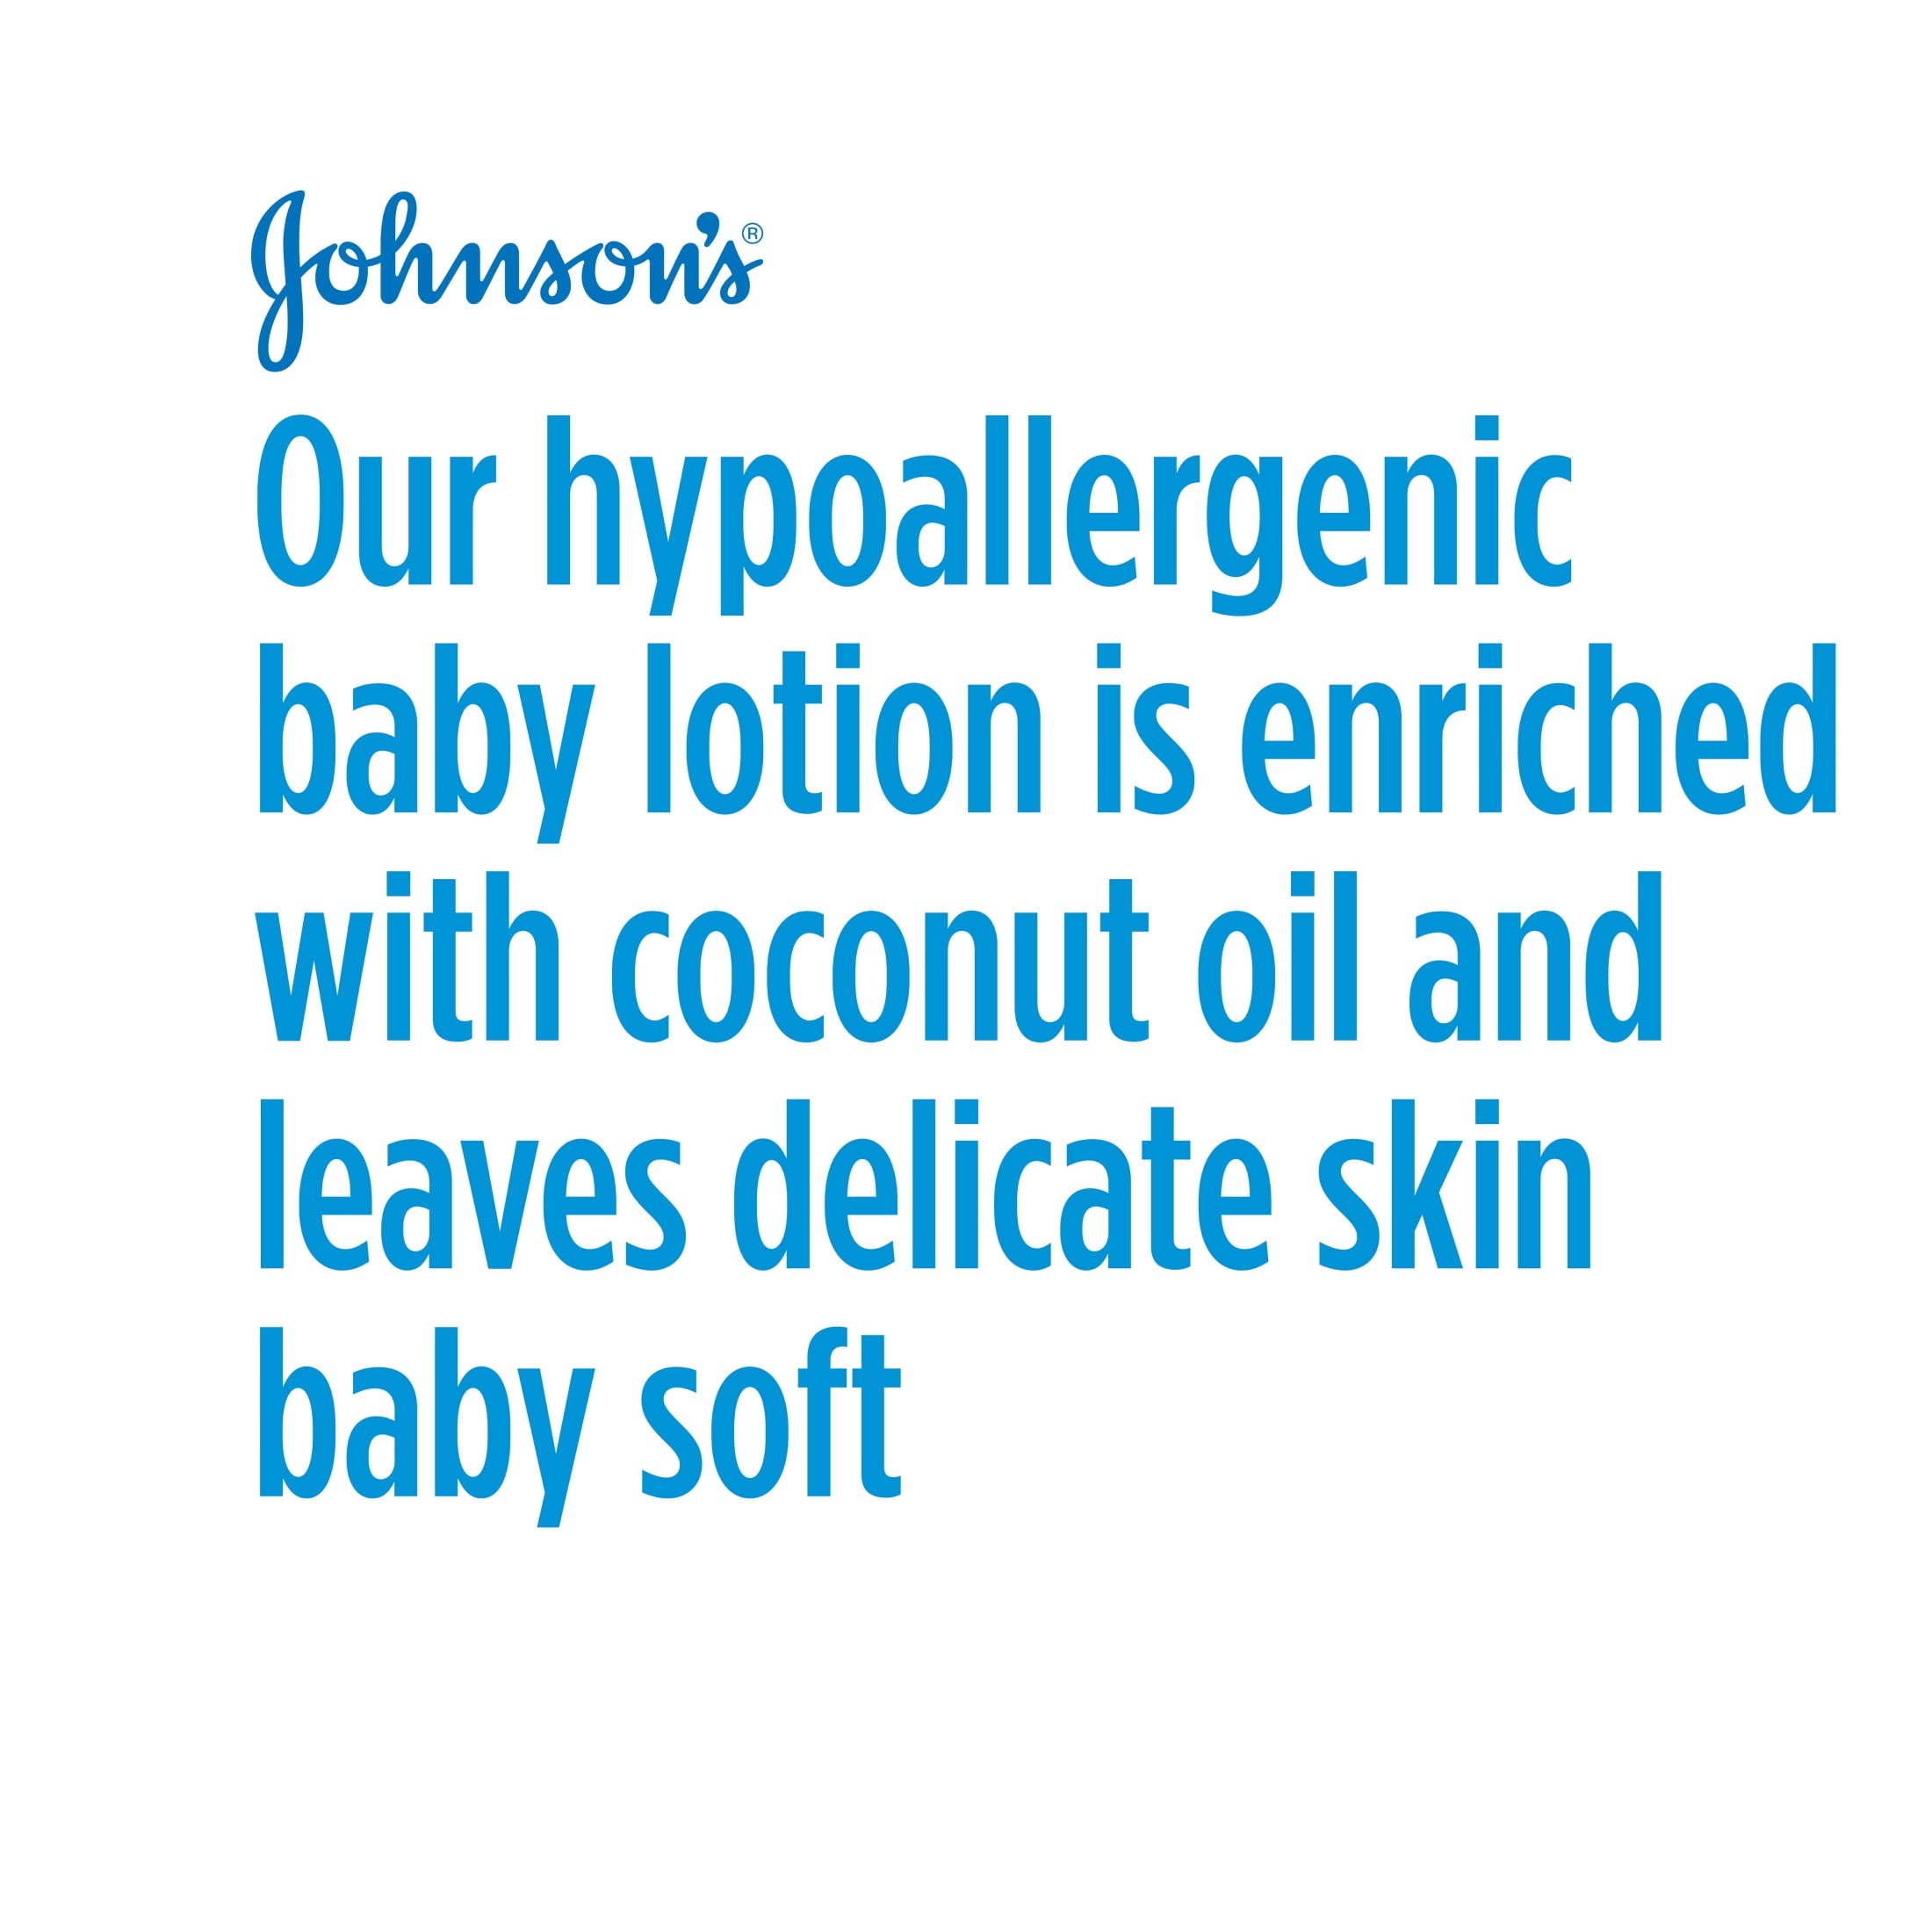 Johnson's Baby Moisturizing Pink Baby Lotion with Coconut Oil,  Hypoallergenic and Dermatologist-Tested, 27.1 fl. oz